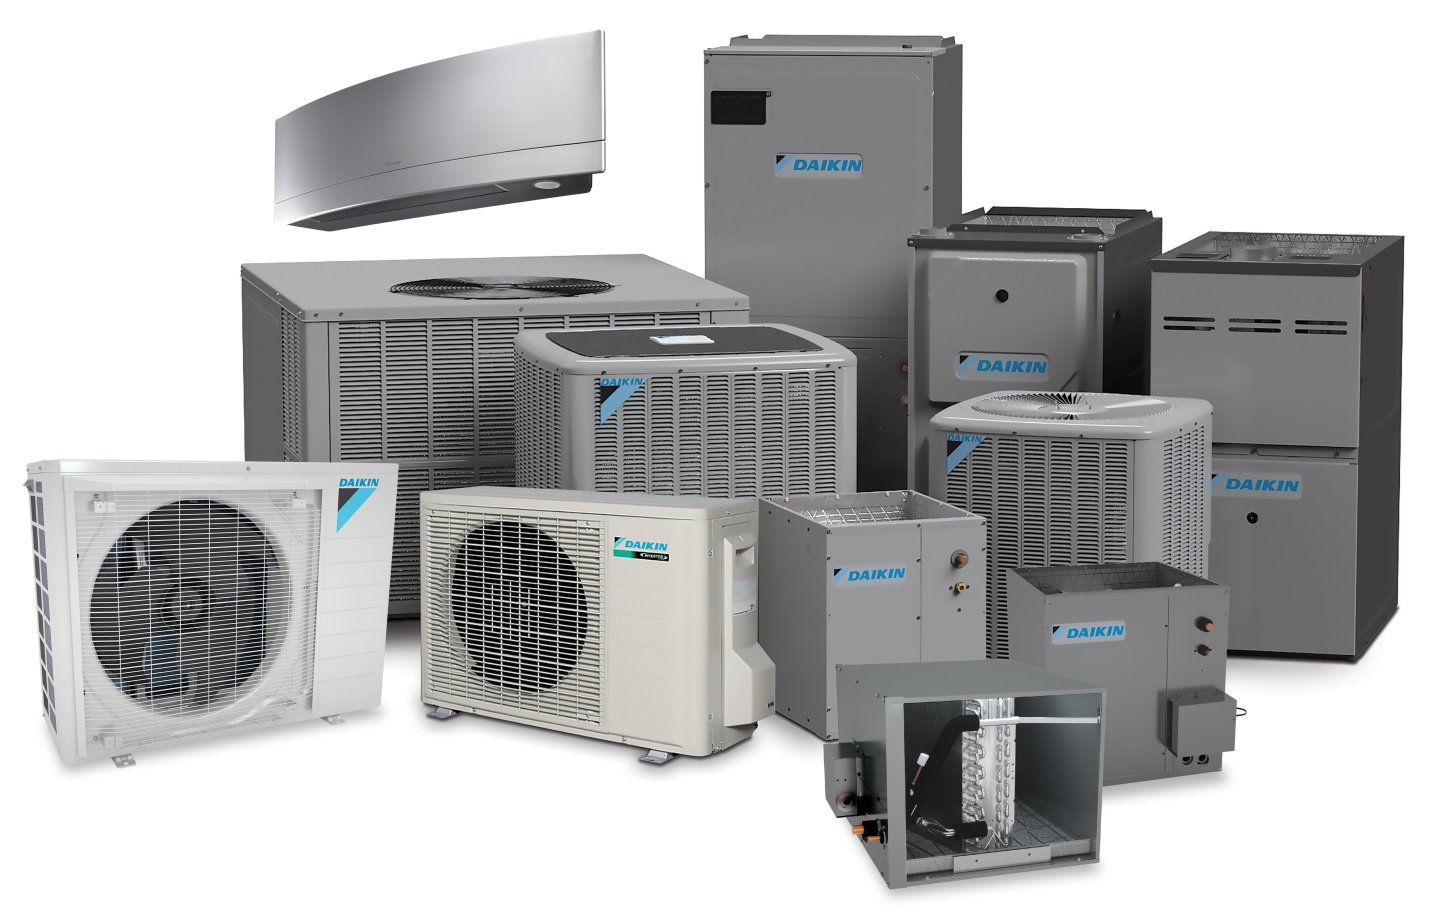 The Daikin Fit heat pump system offers a range of options for heating and cooling any size home.